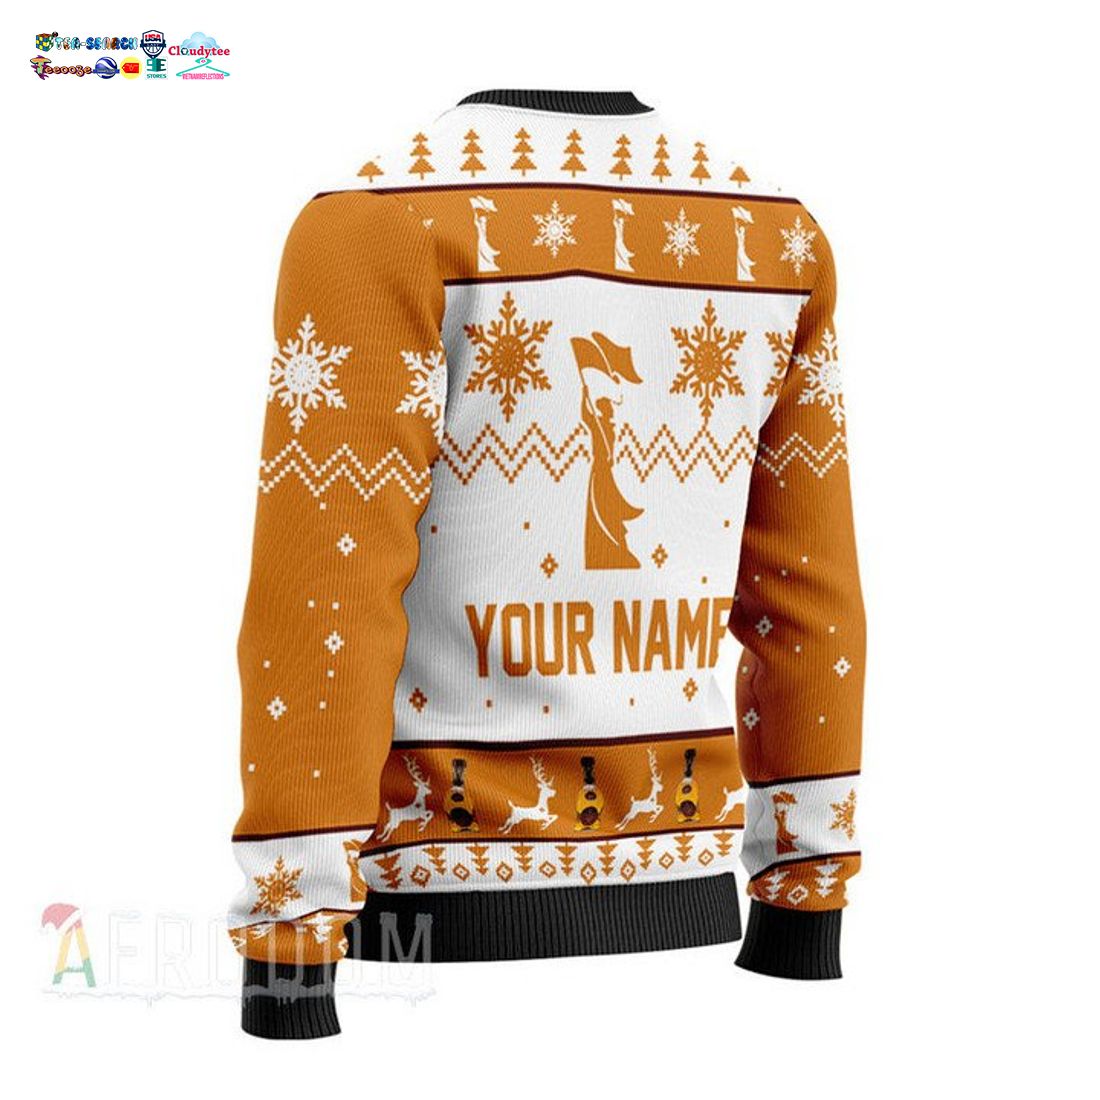 Personalized Name Cardhu Ugly Christmas Sweater